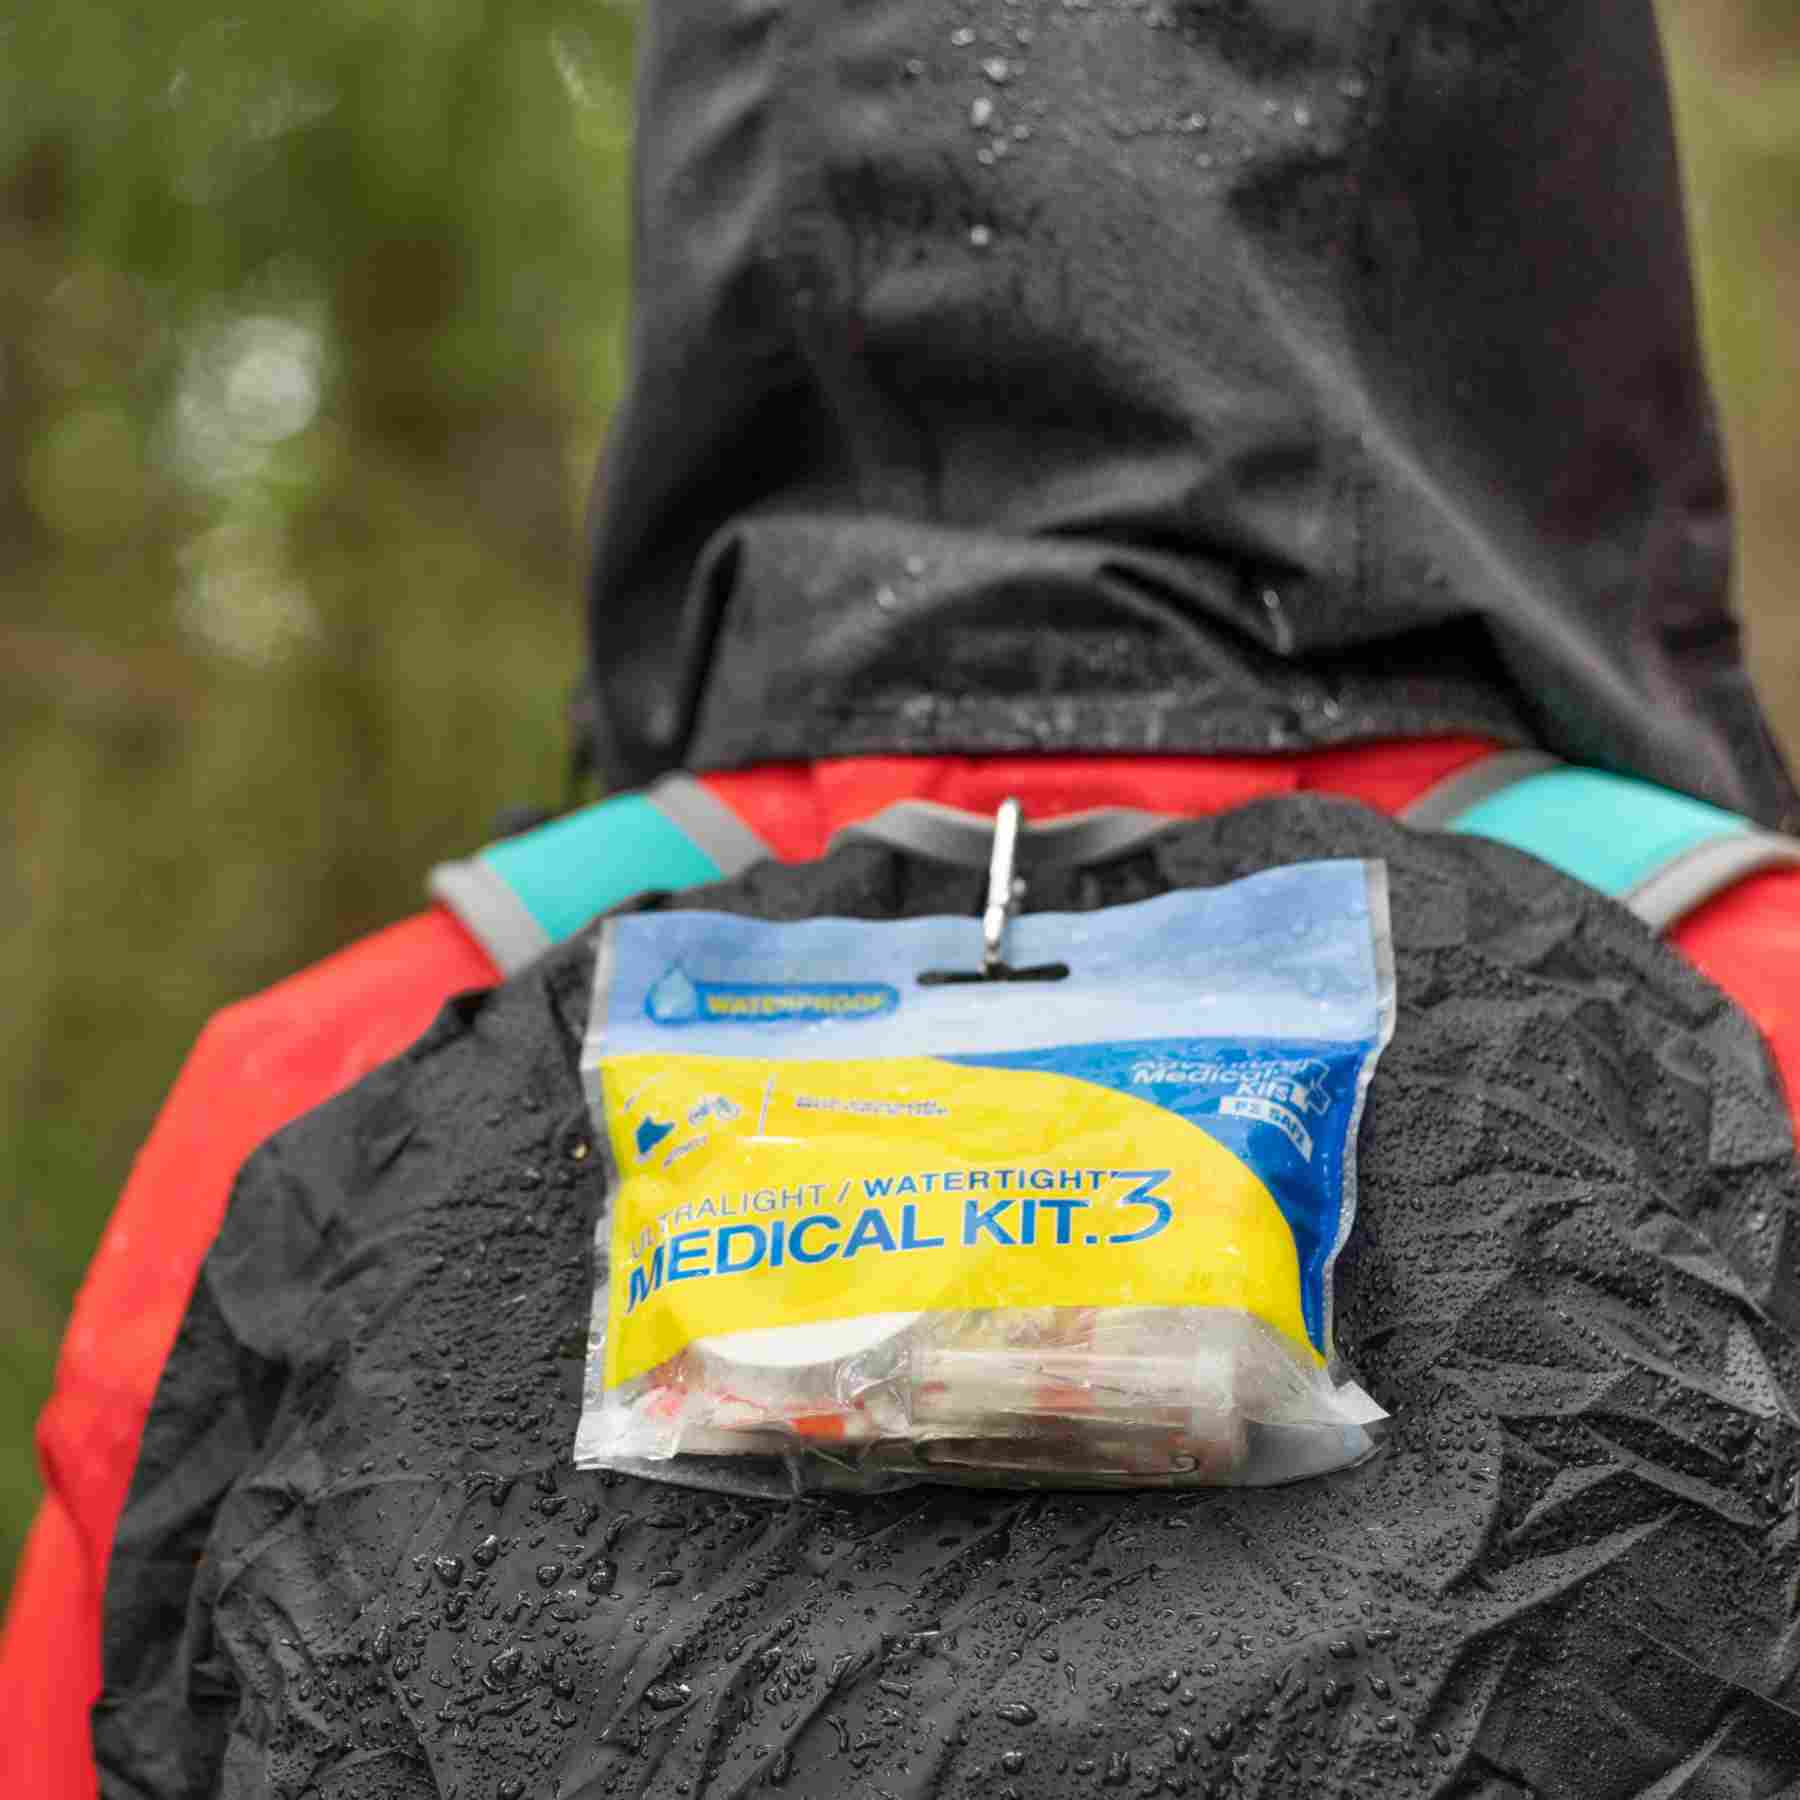 Ultralight/Watertight Medical Kit - .3 wet kit attached to hiker backpack